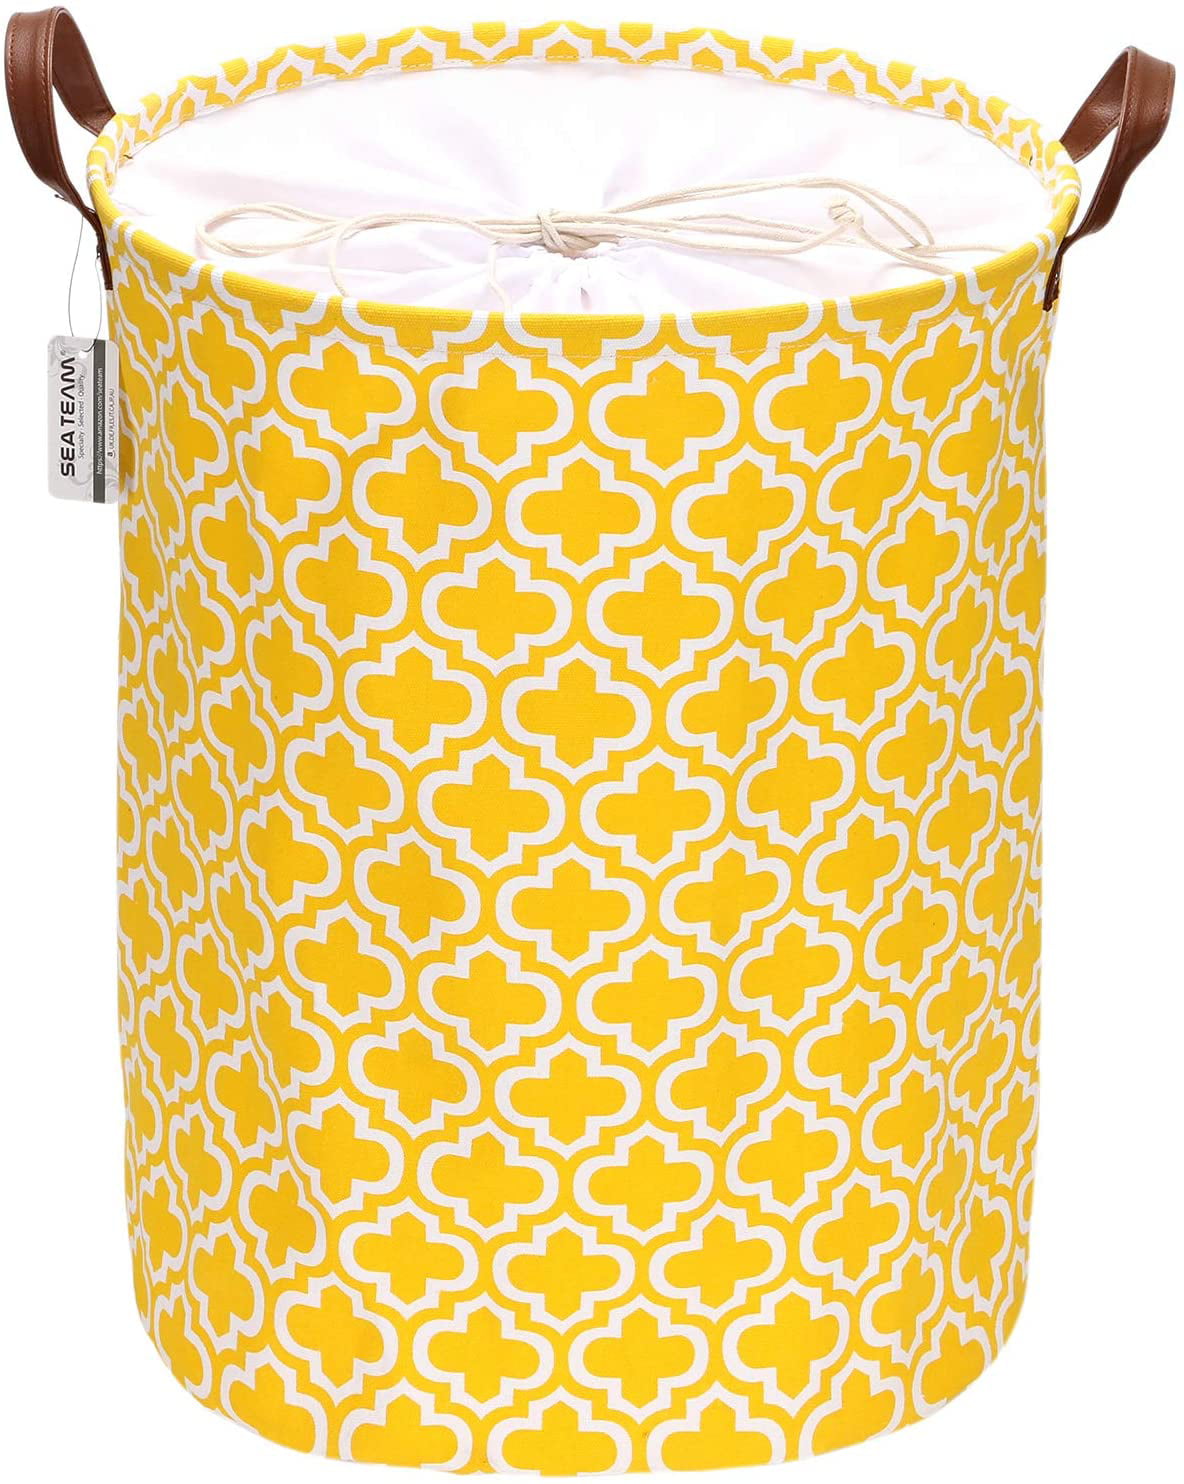 Sea Team Quatrefoil Pattern Laundry Hamper Canvas Fabric Laundry Basket Collapsible Storage Bin with PU Leather Handles and Drawstring Closure Aqua Waterproof Inner 19.7 by 15.7 inches 